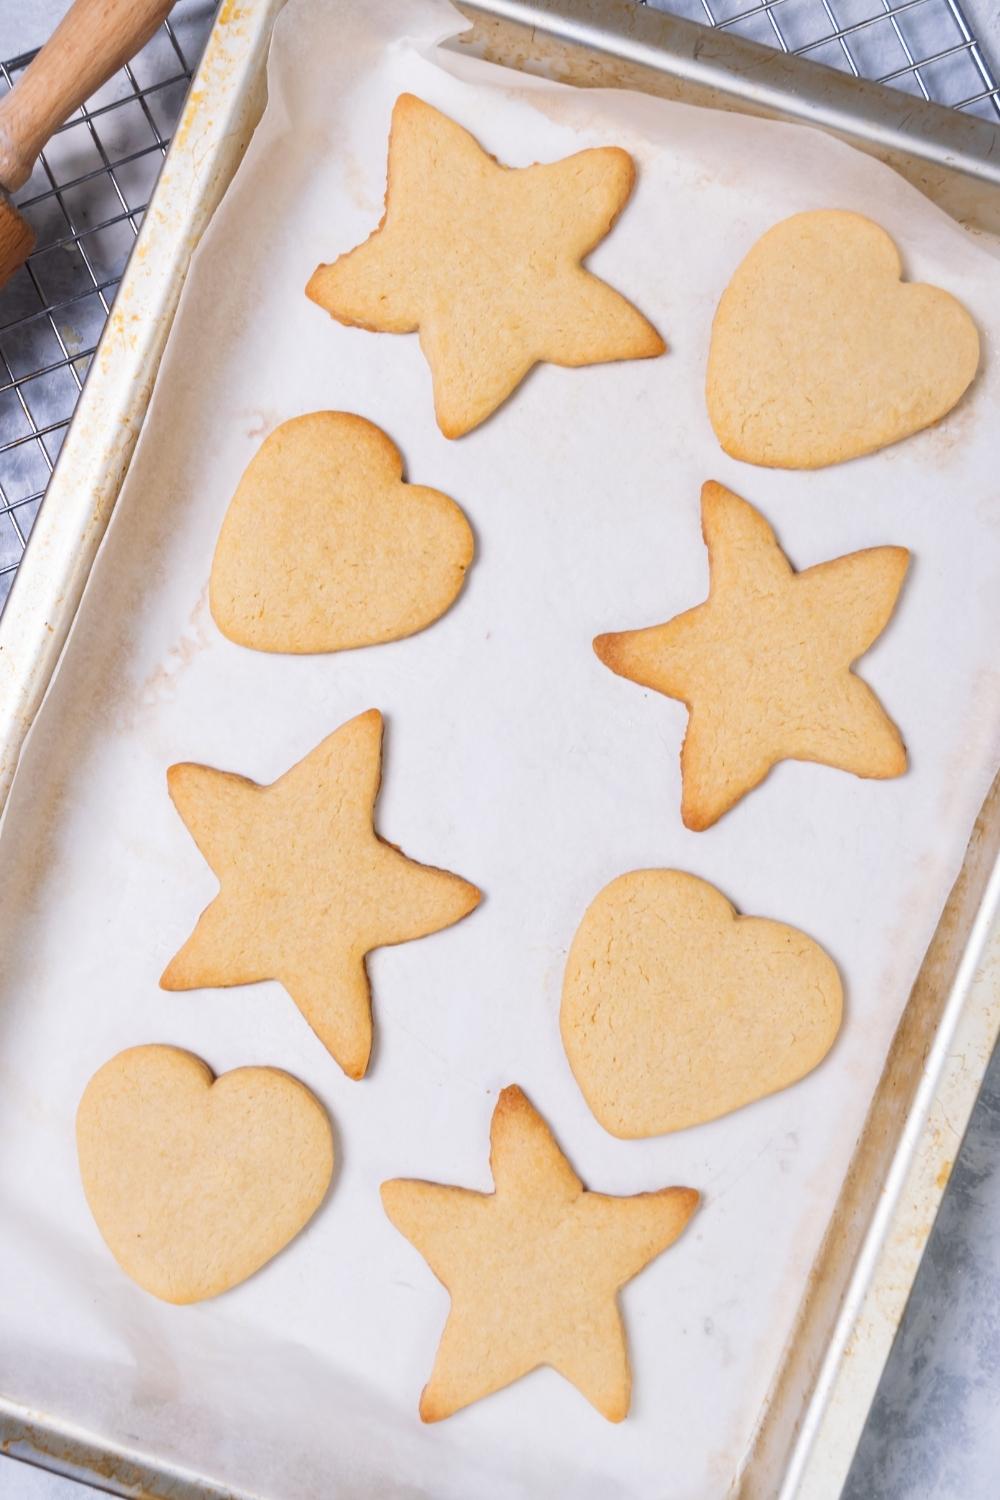 A baking tray lined with parchment paper with baked cut out cookies on it.